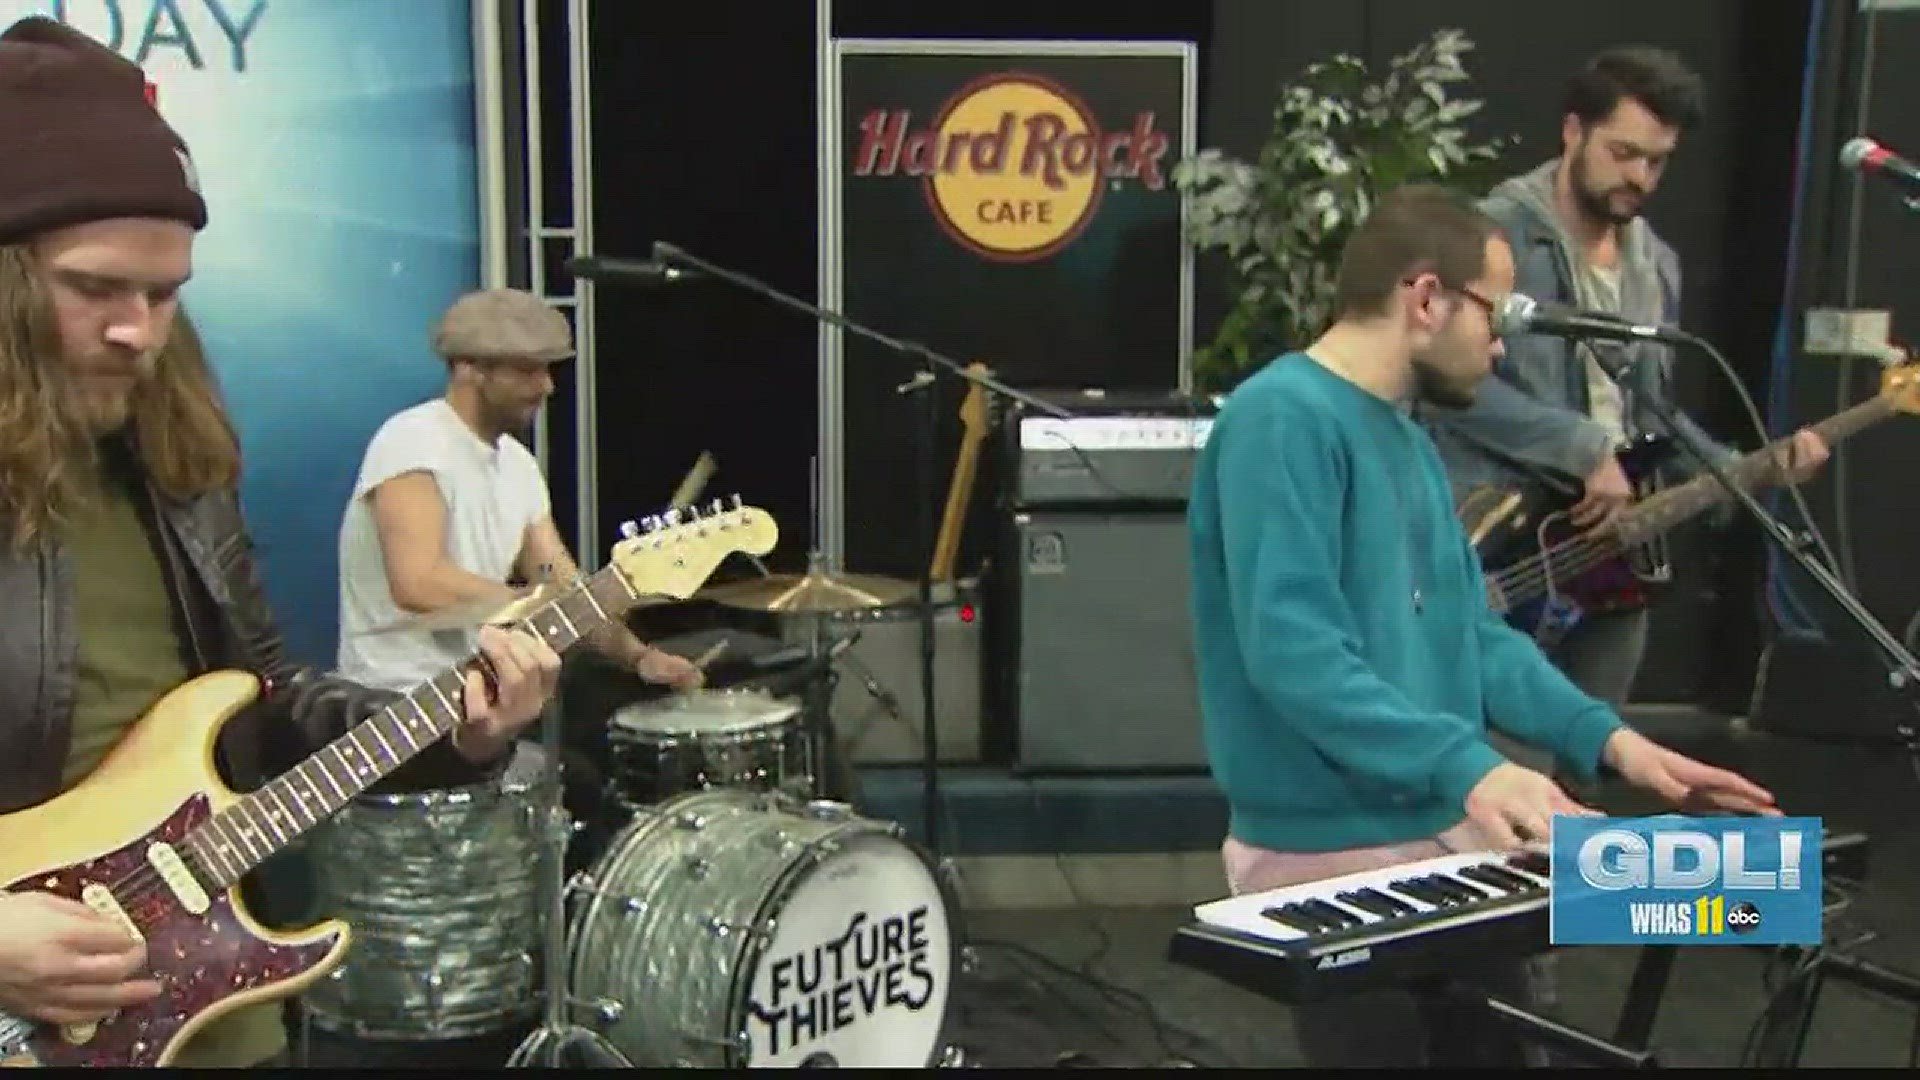 Future Thieves have played at Forcastle, Bonnaroo, SXSW, and now Great Day Live.